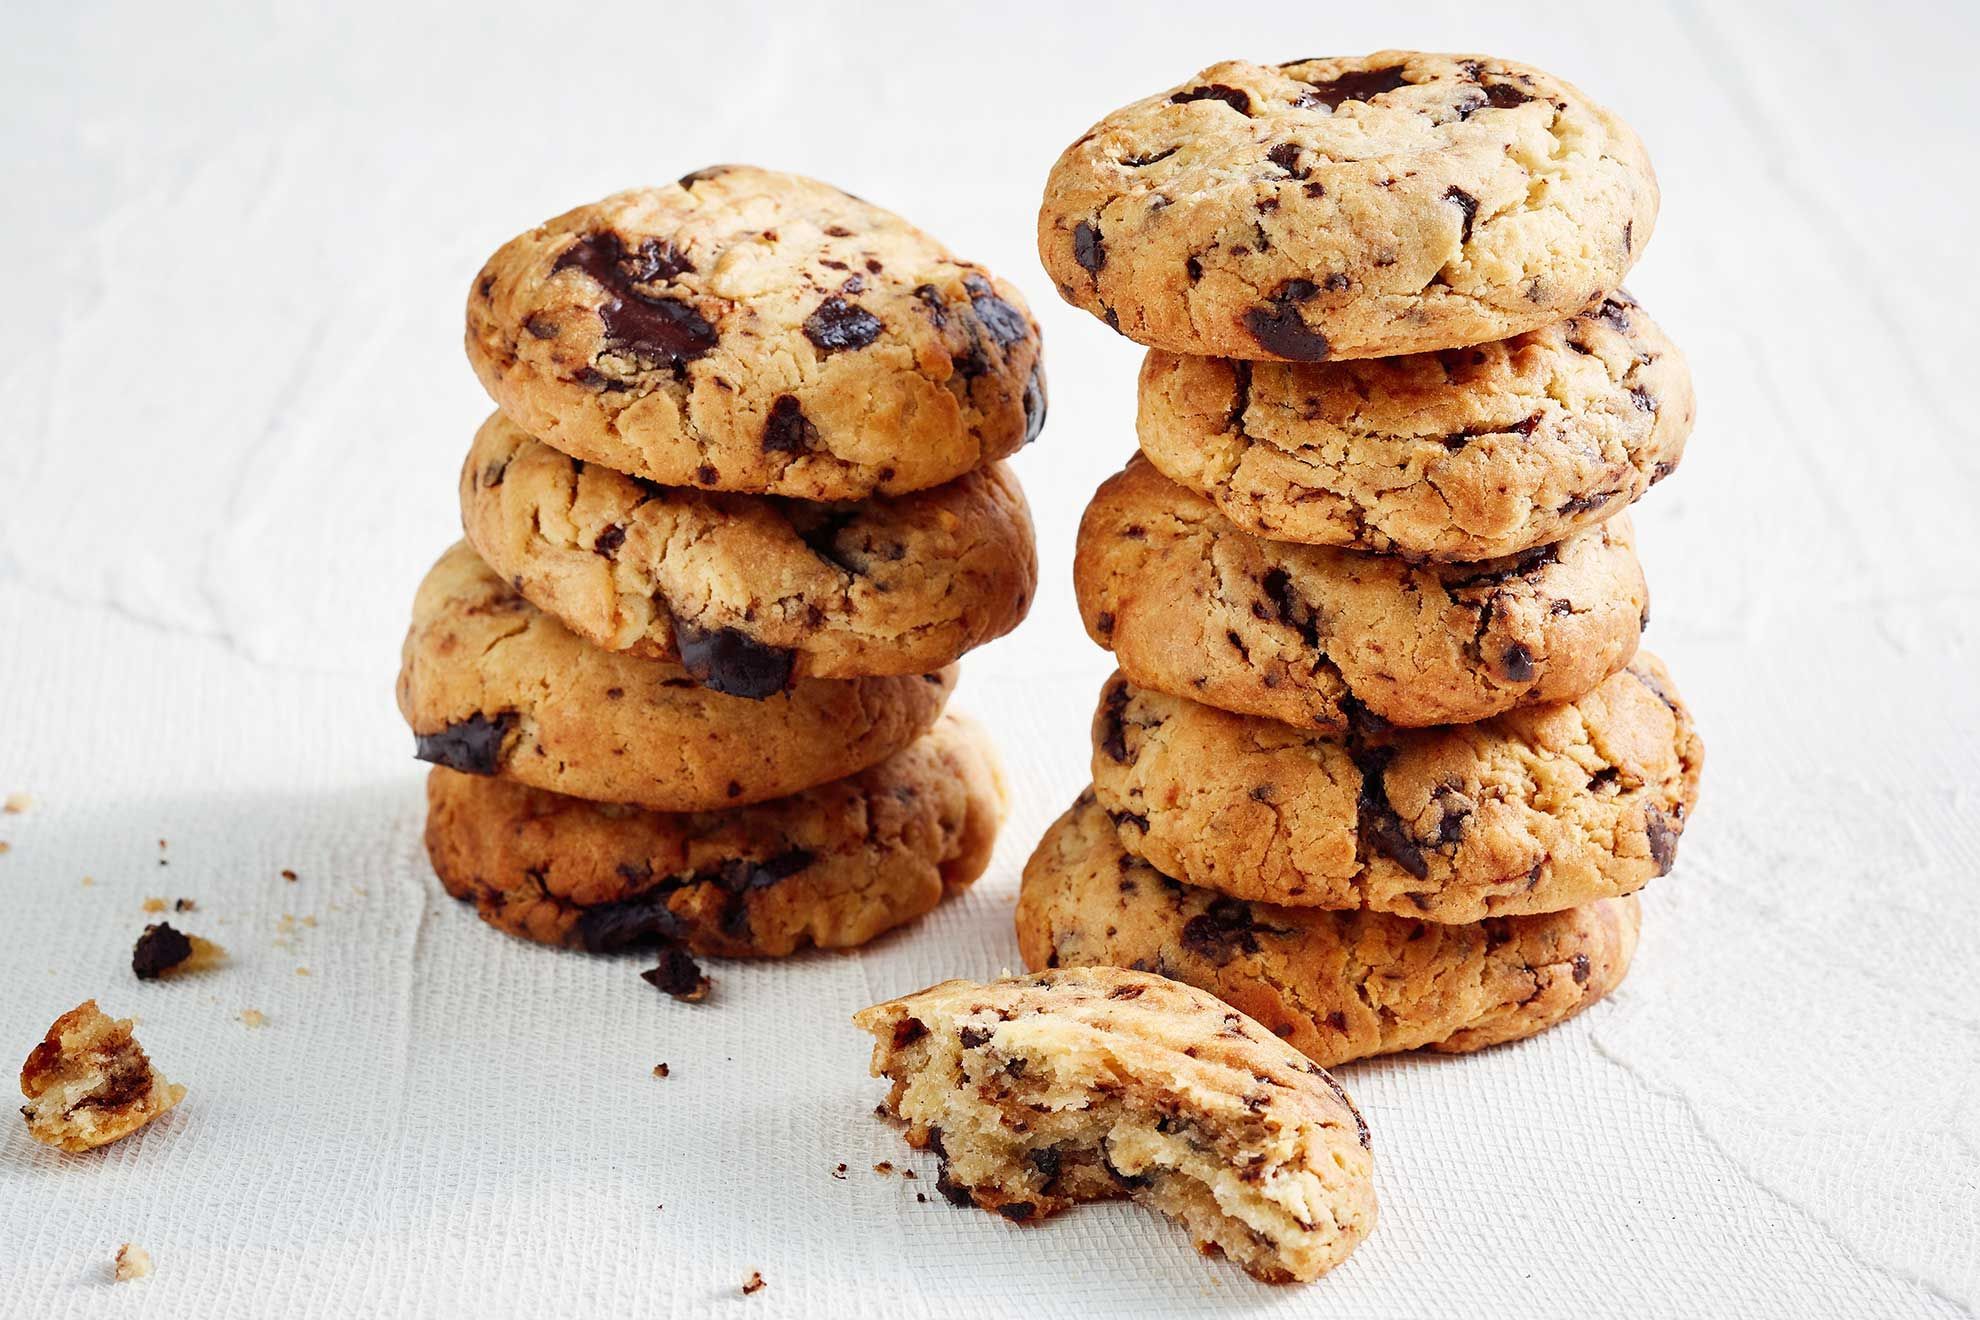 6 Mouthwatering Sugar-Free Cookie Creations